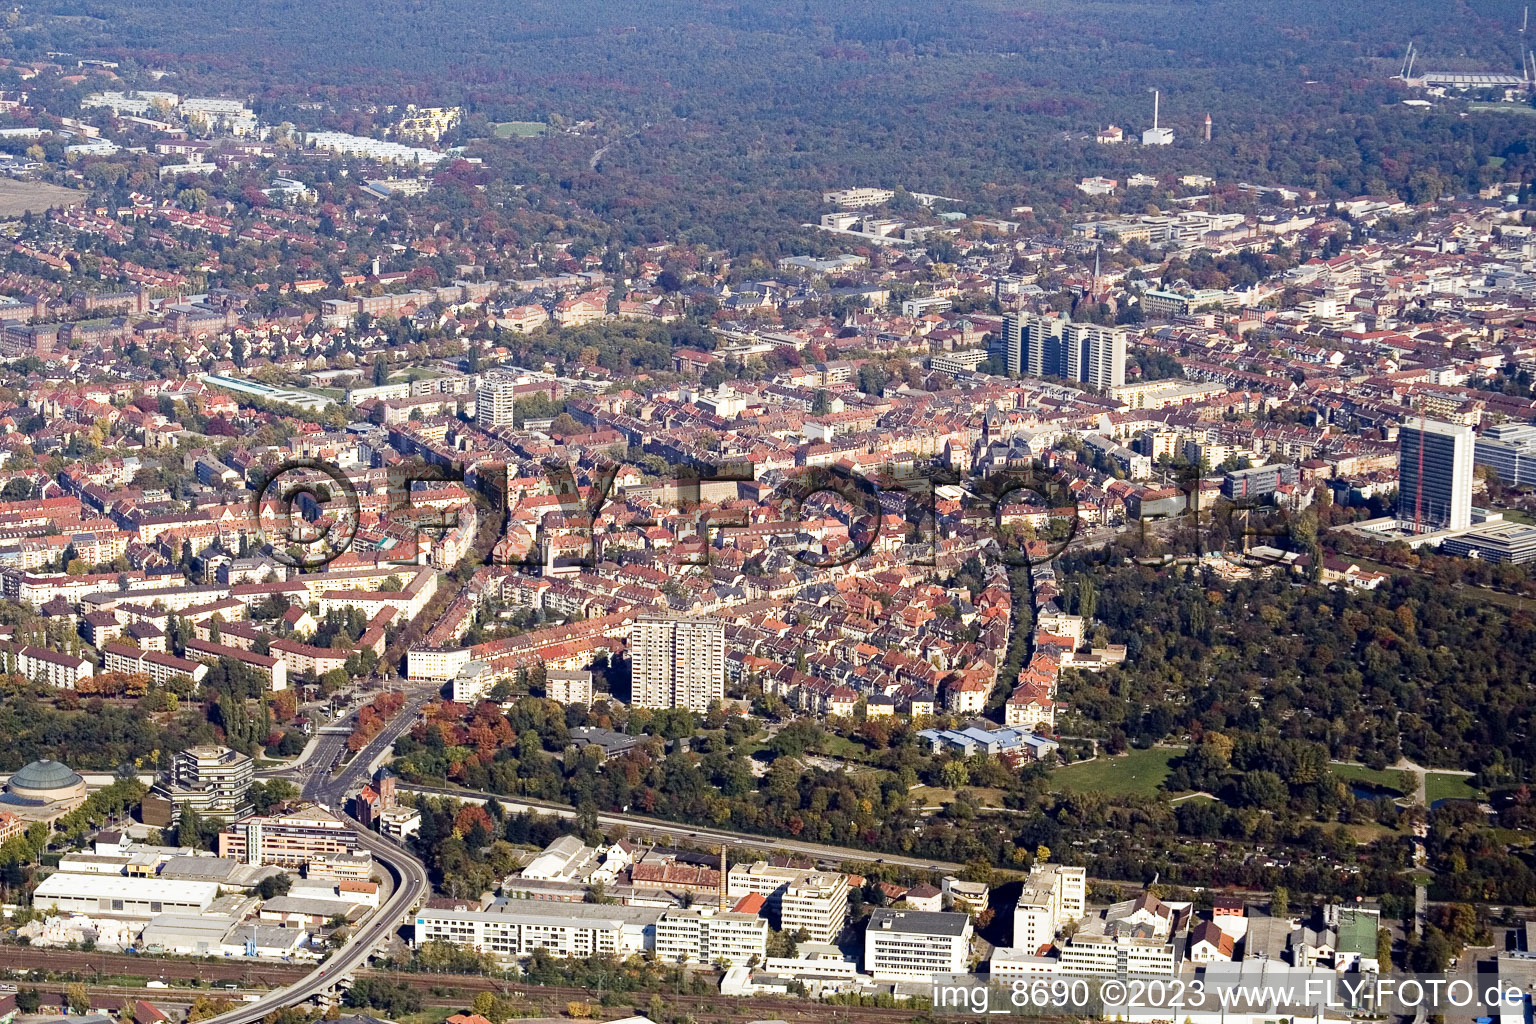 District Weststadt in Karlsruhe in the state Baden-Wuerttemberg, Germany